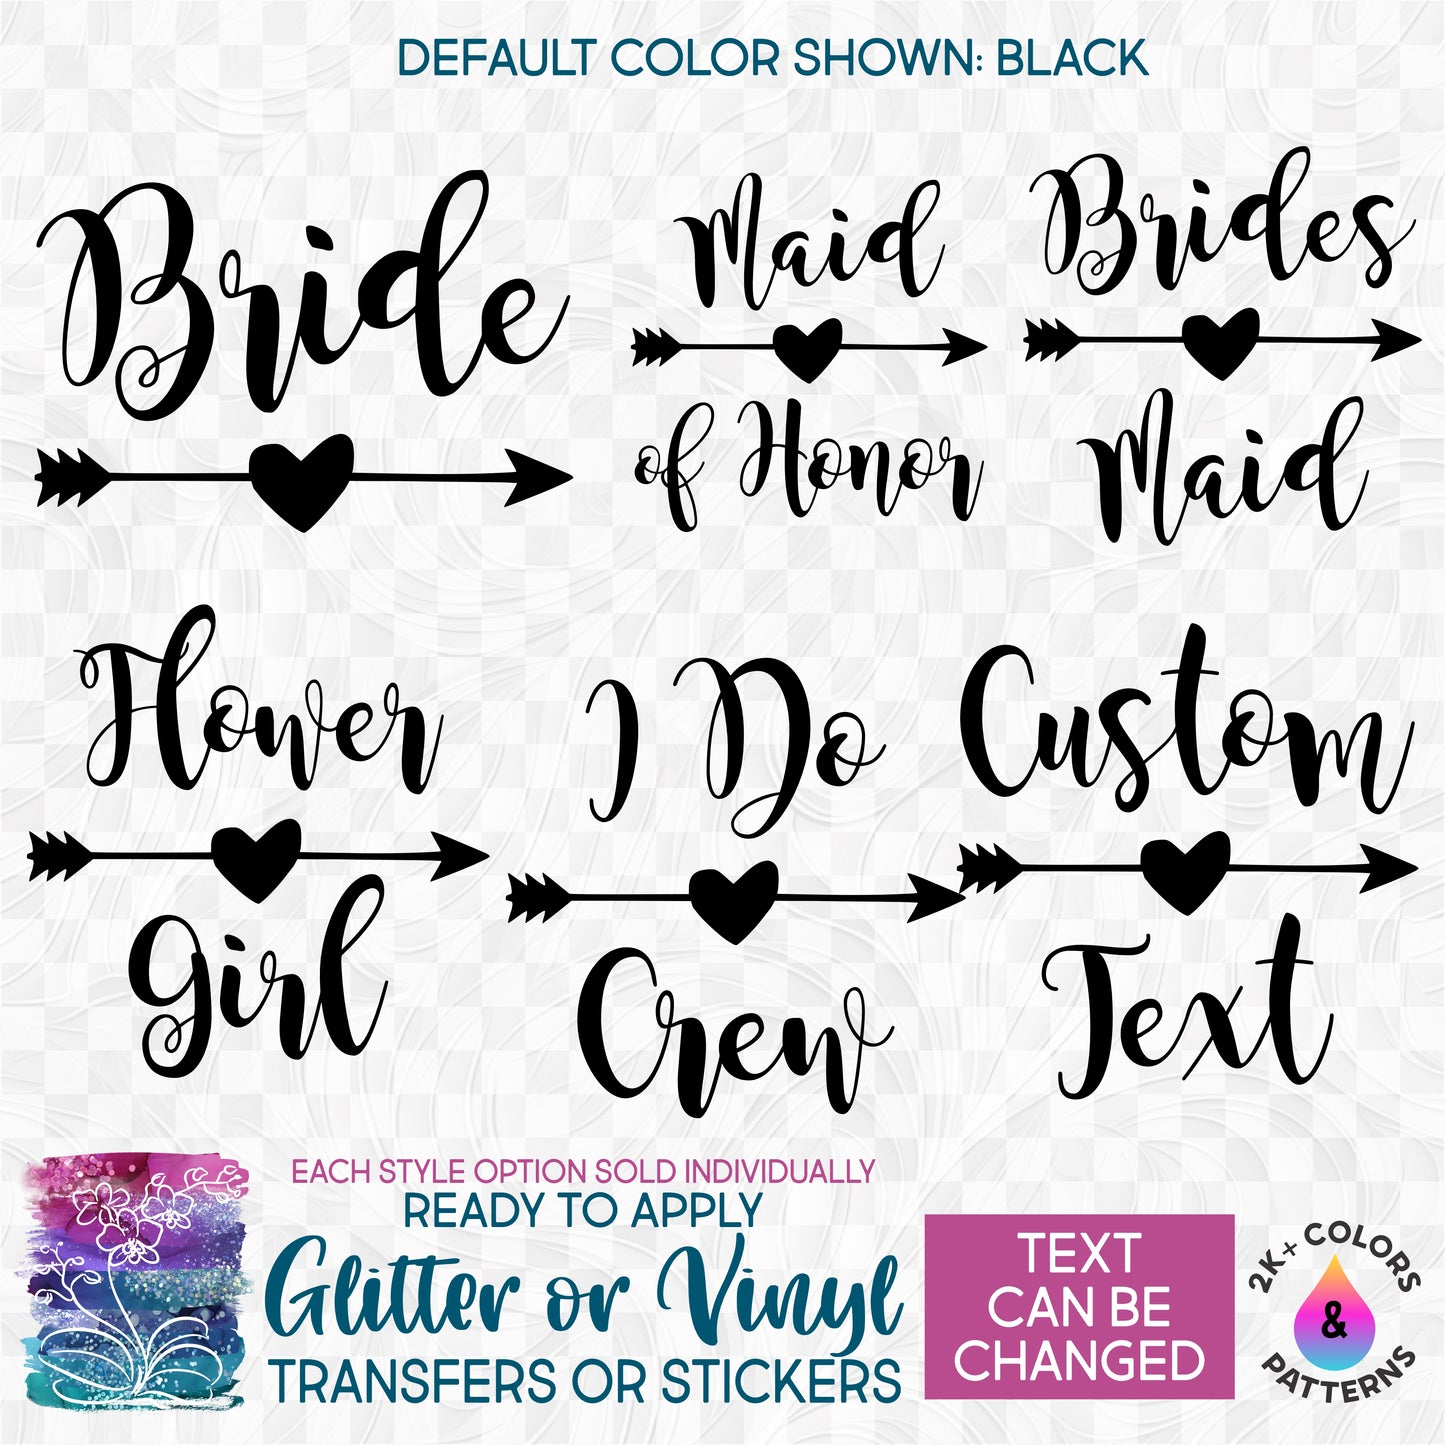 s81-5 Bride Maid of Honor Bridesmaid Mother of the Bride Flower Girl Custom Text Custom Printed Iron On Transfer or Sticker